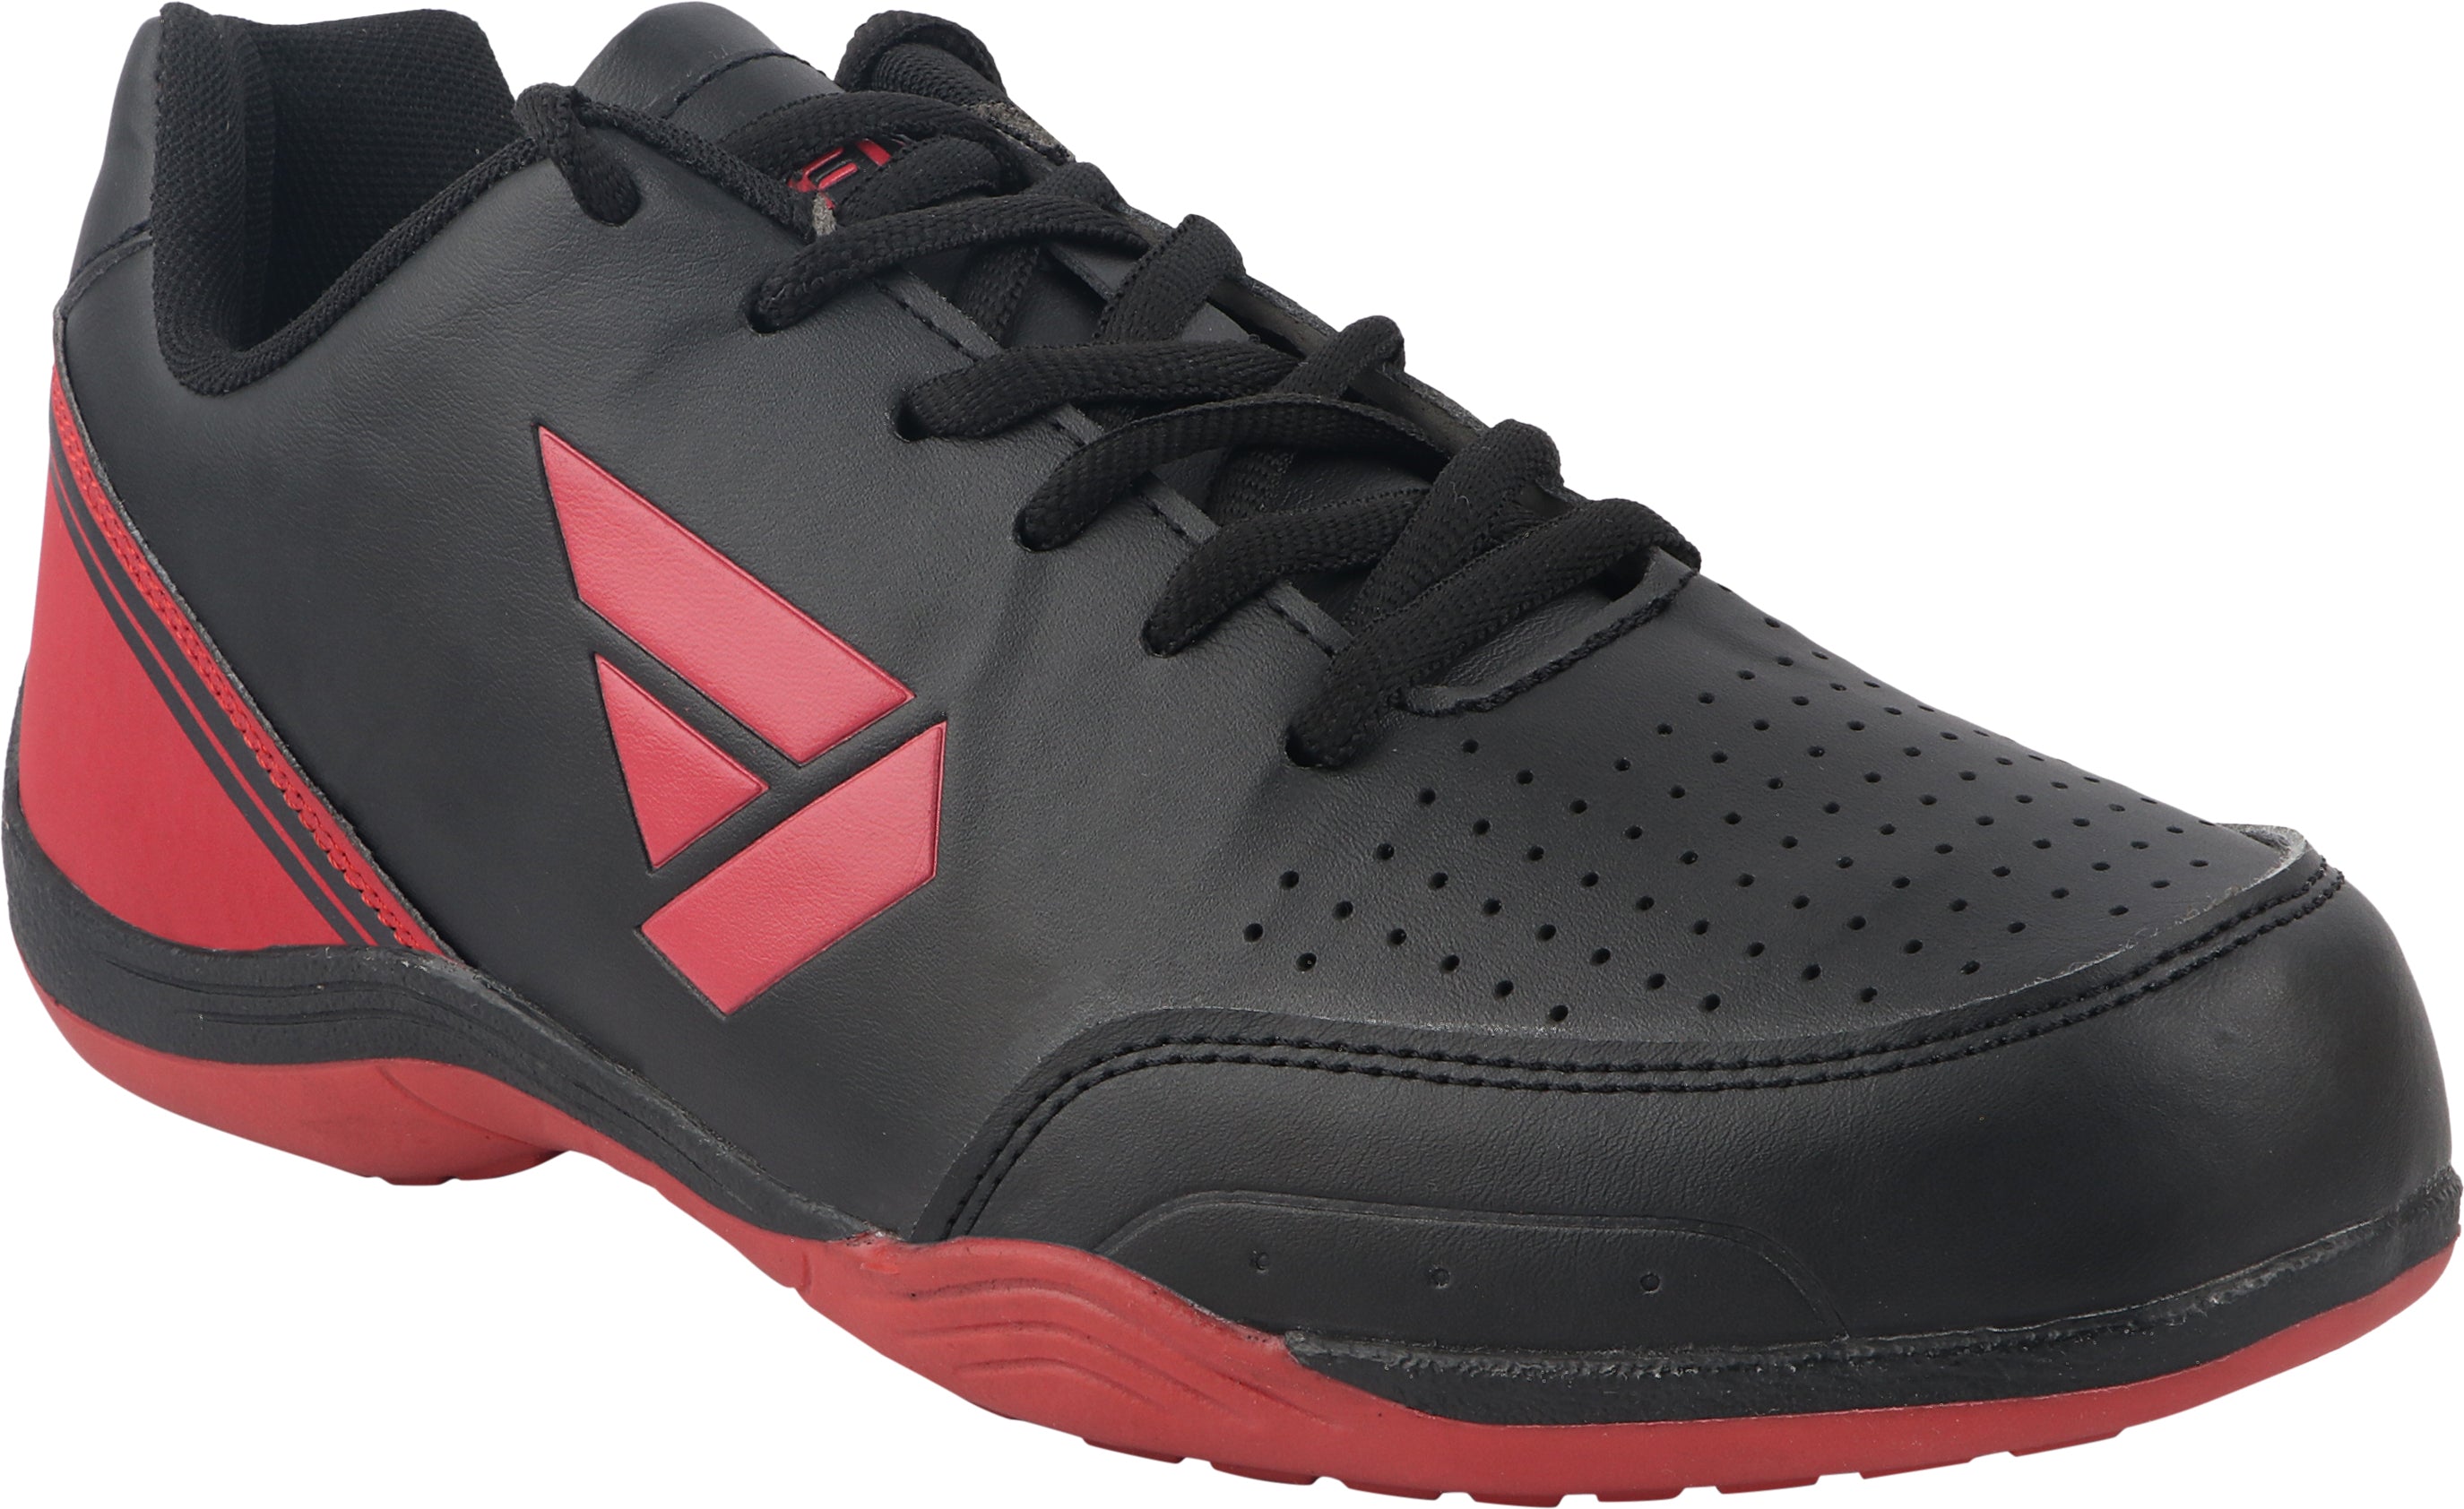 Fuel Ultima Sports Shoes For Men (Black-Red)